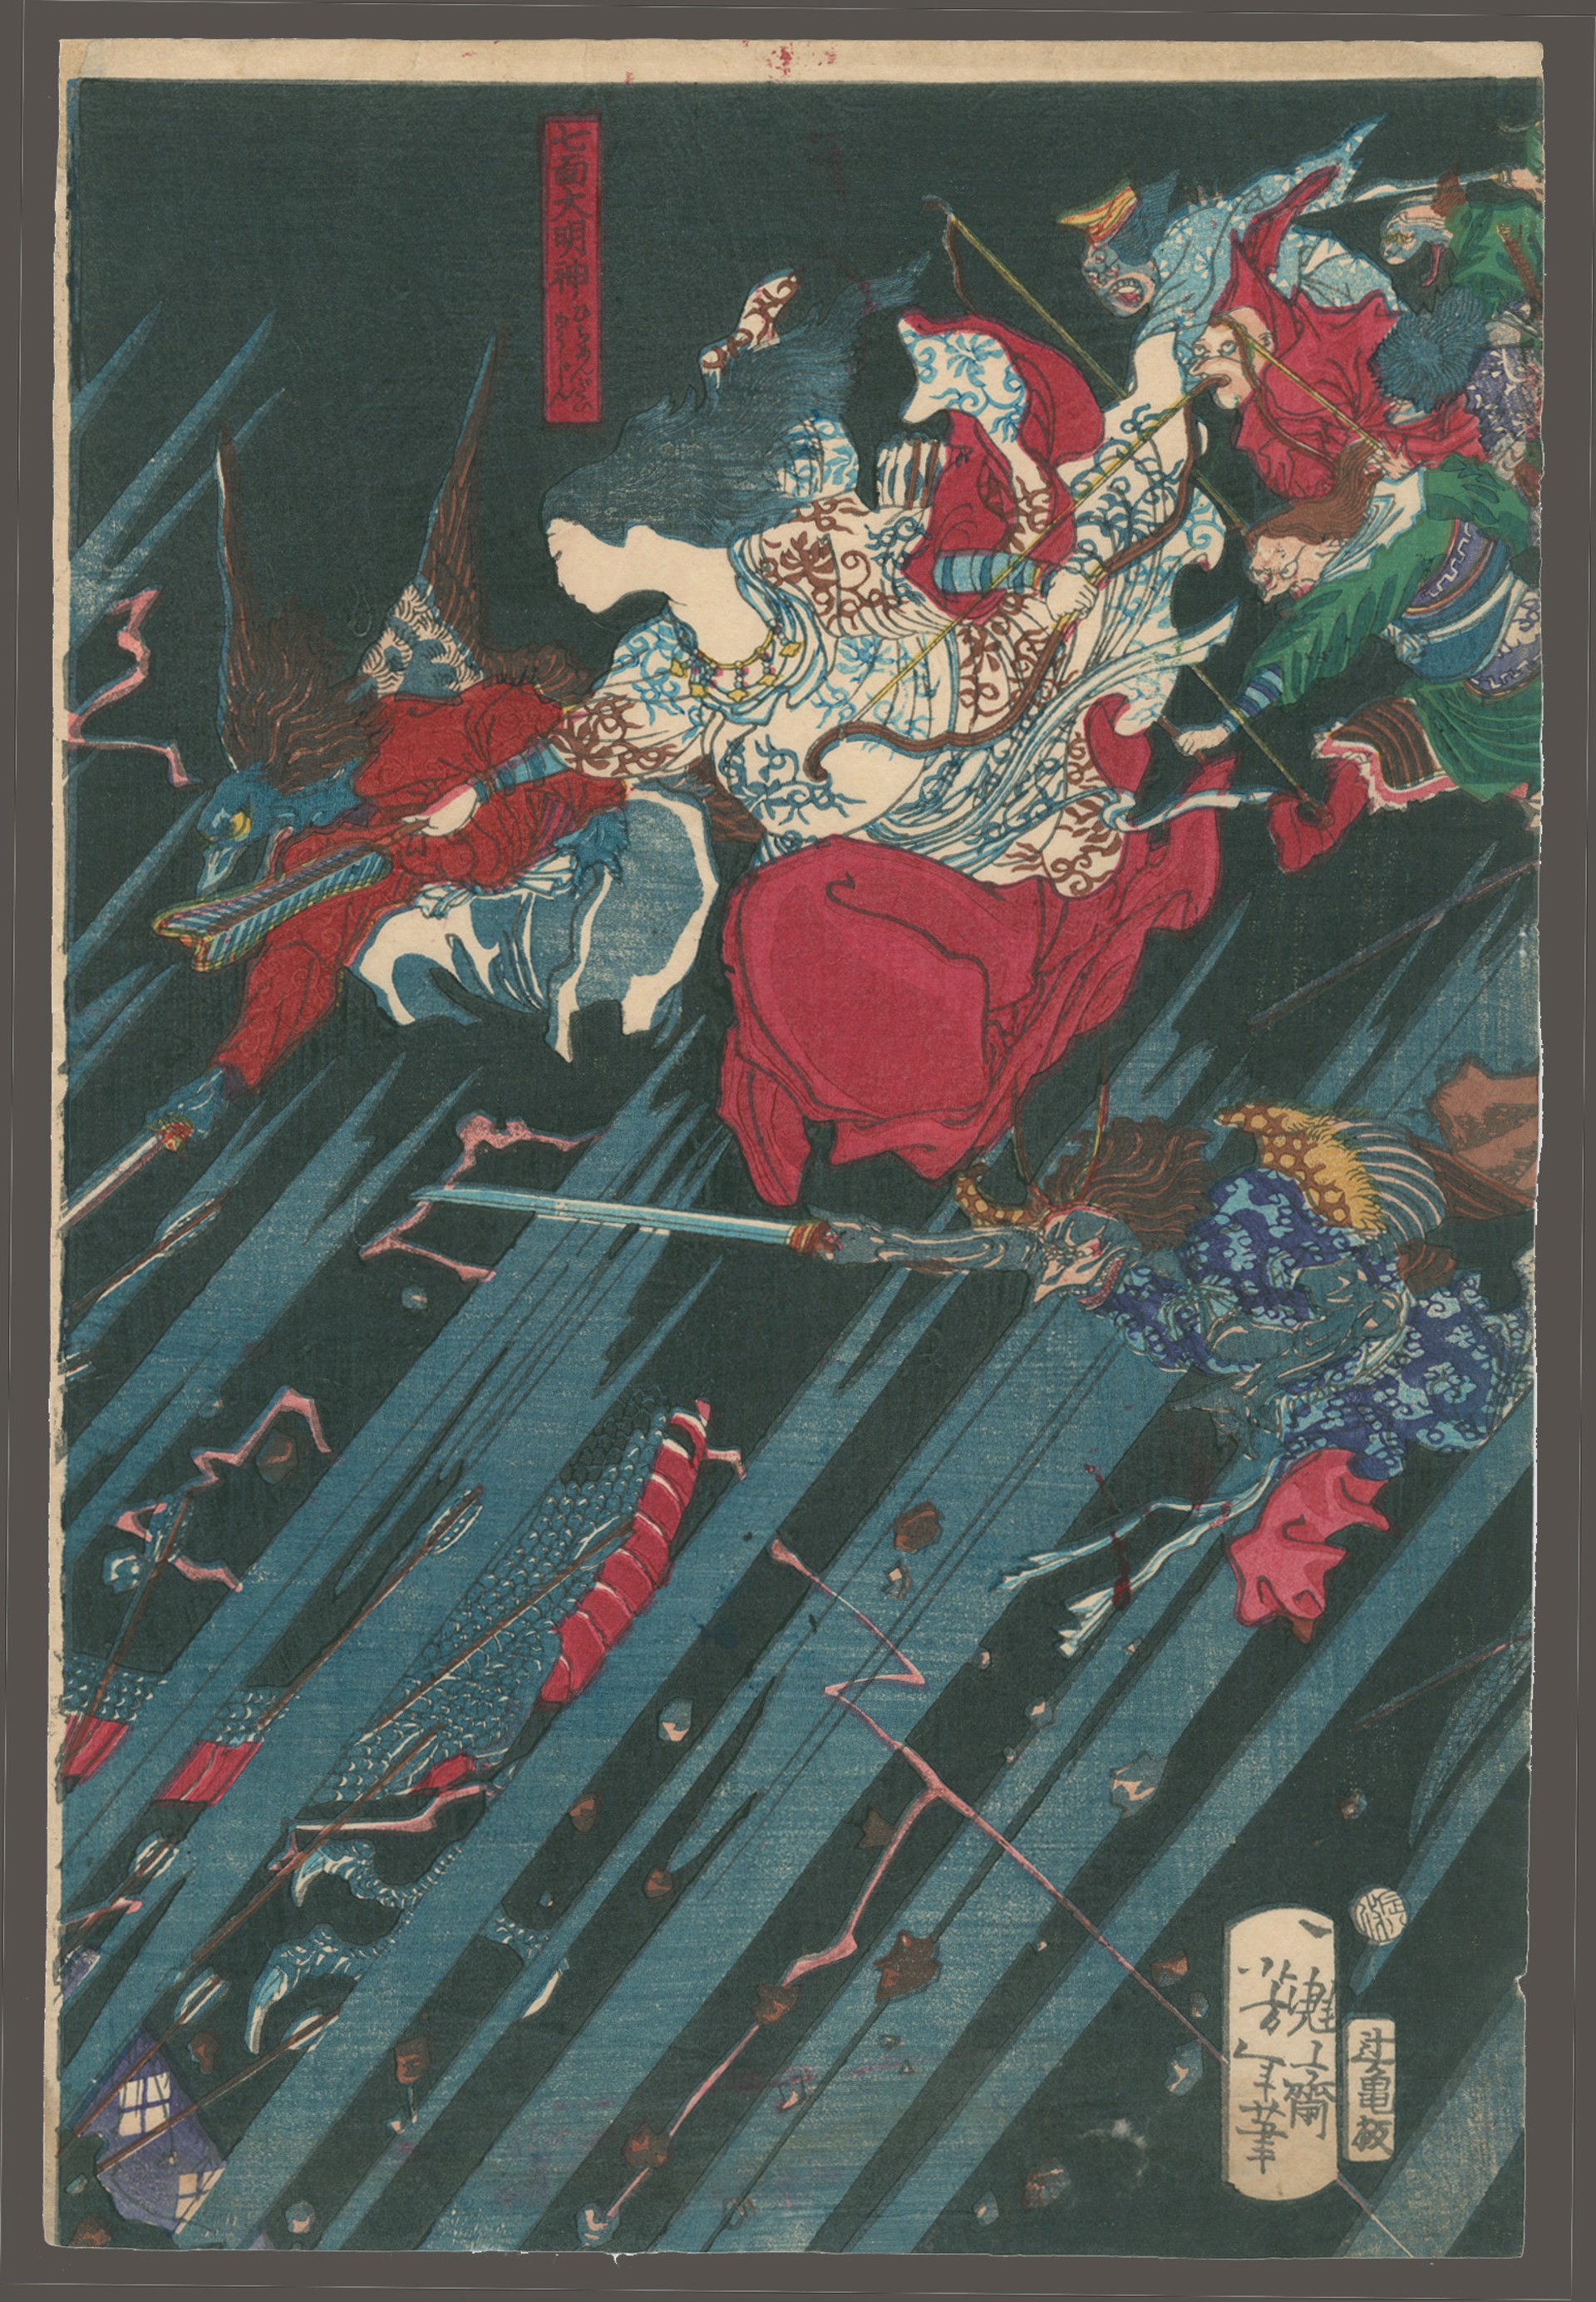 The Appearance of the Seven-headed Dragon God by Yoshitoshi